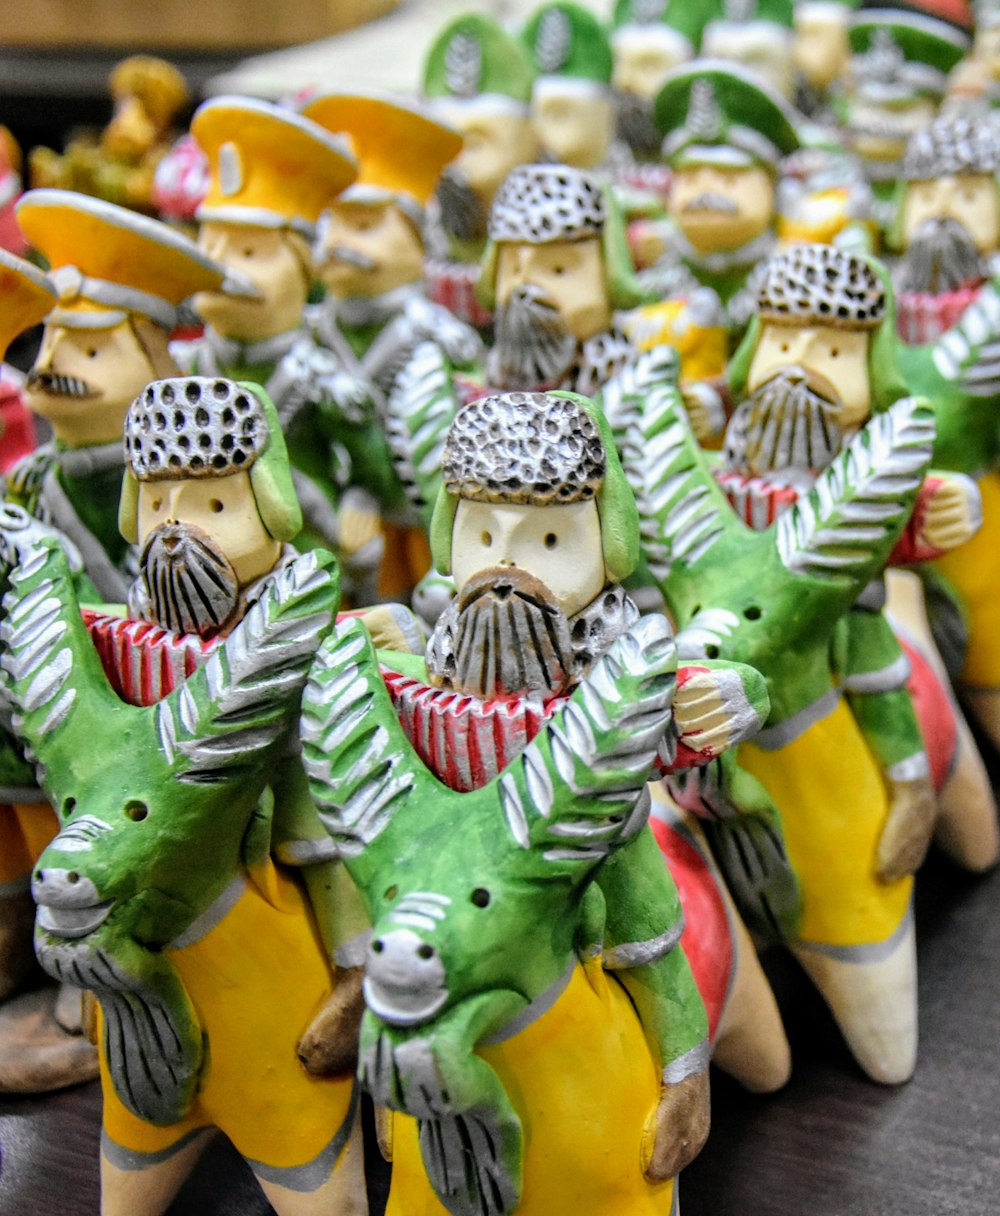 a group of ceramic figurines of men riding horses